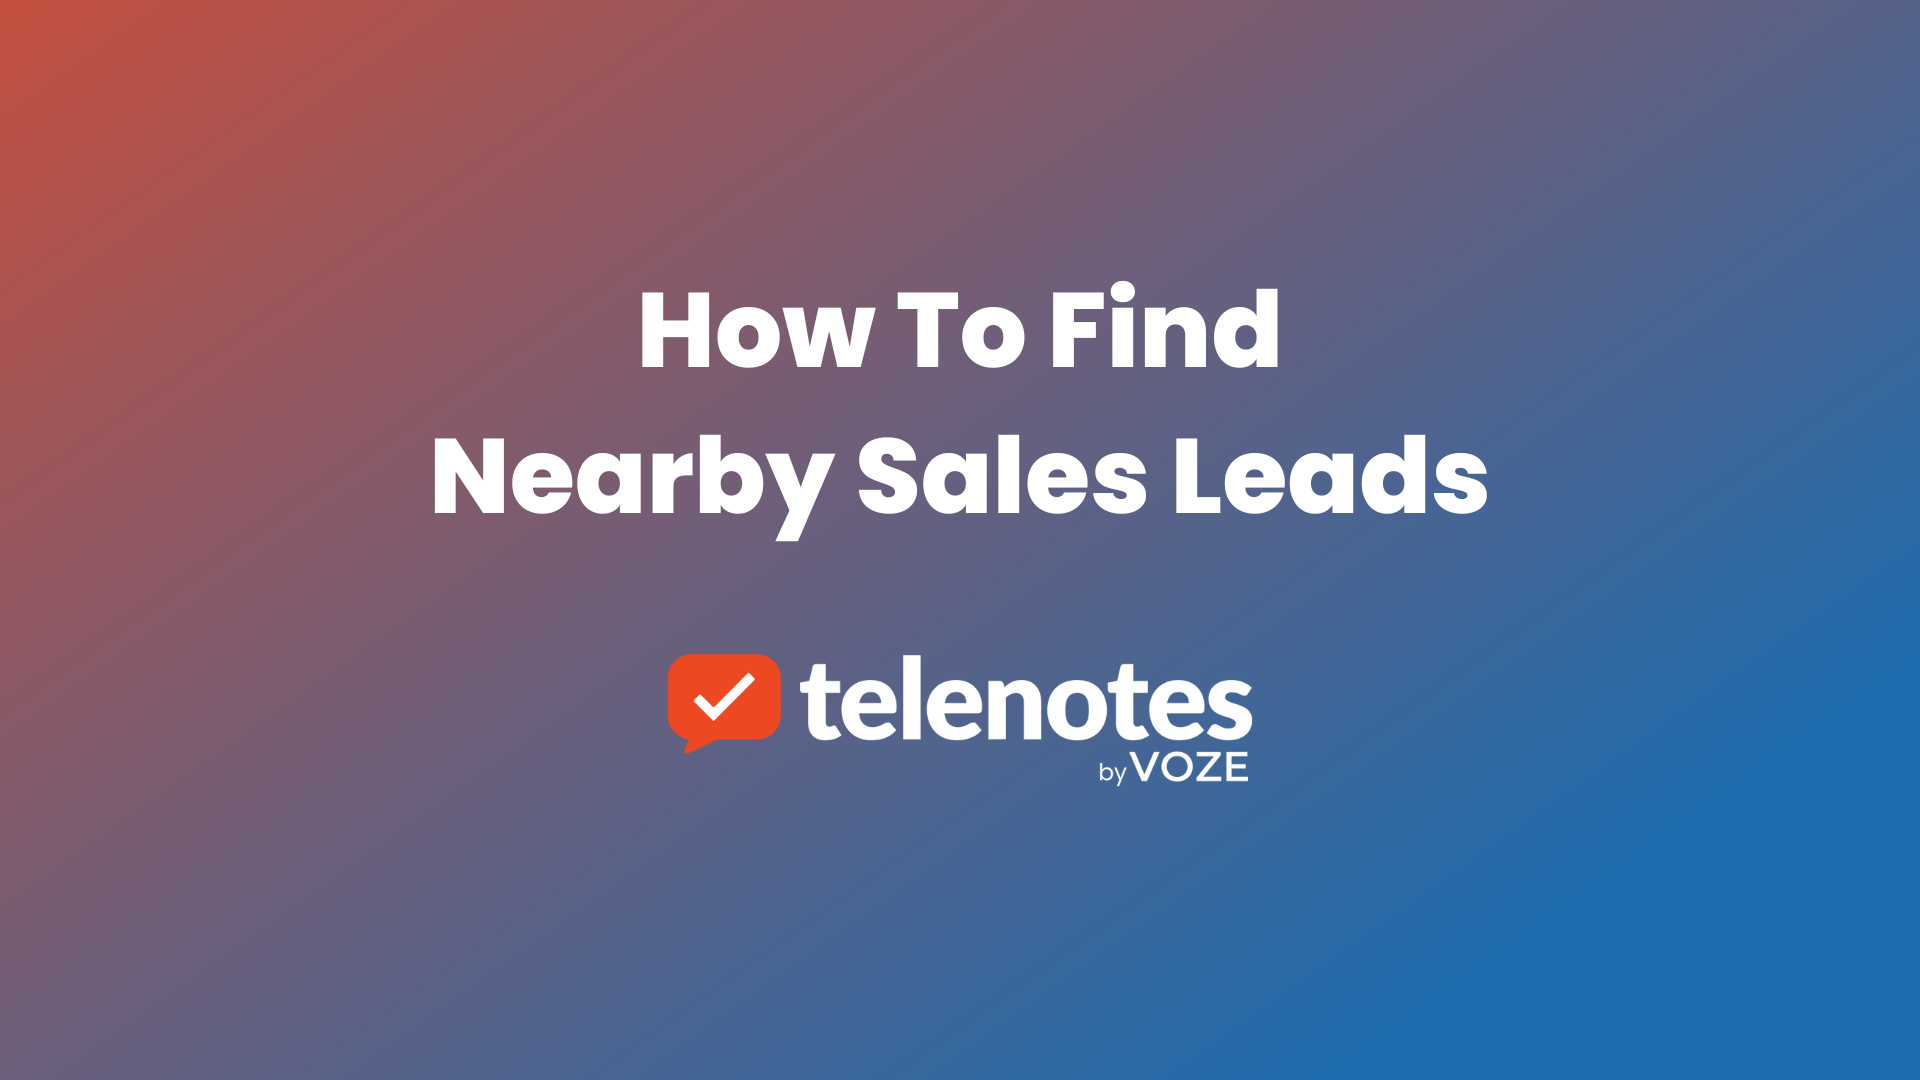 Sales Route Planning: How To Search For Nearby Businesses To Identify Potential New Prospects & Leads